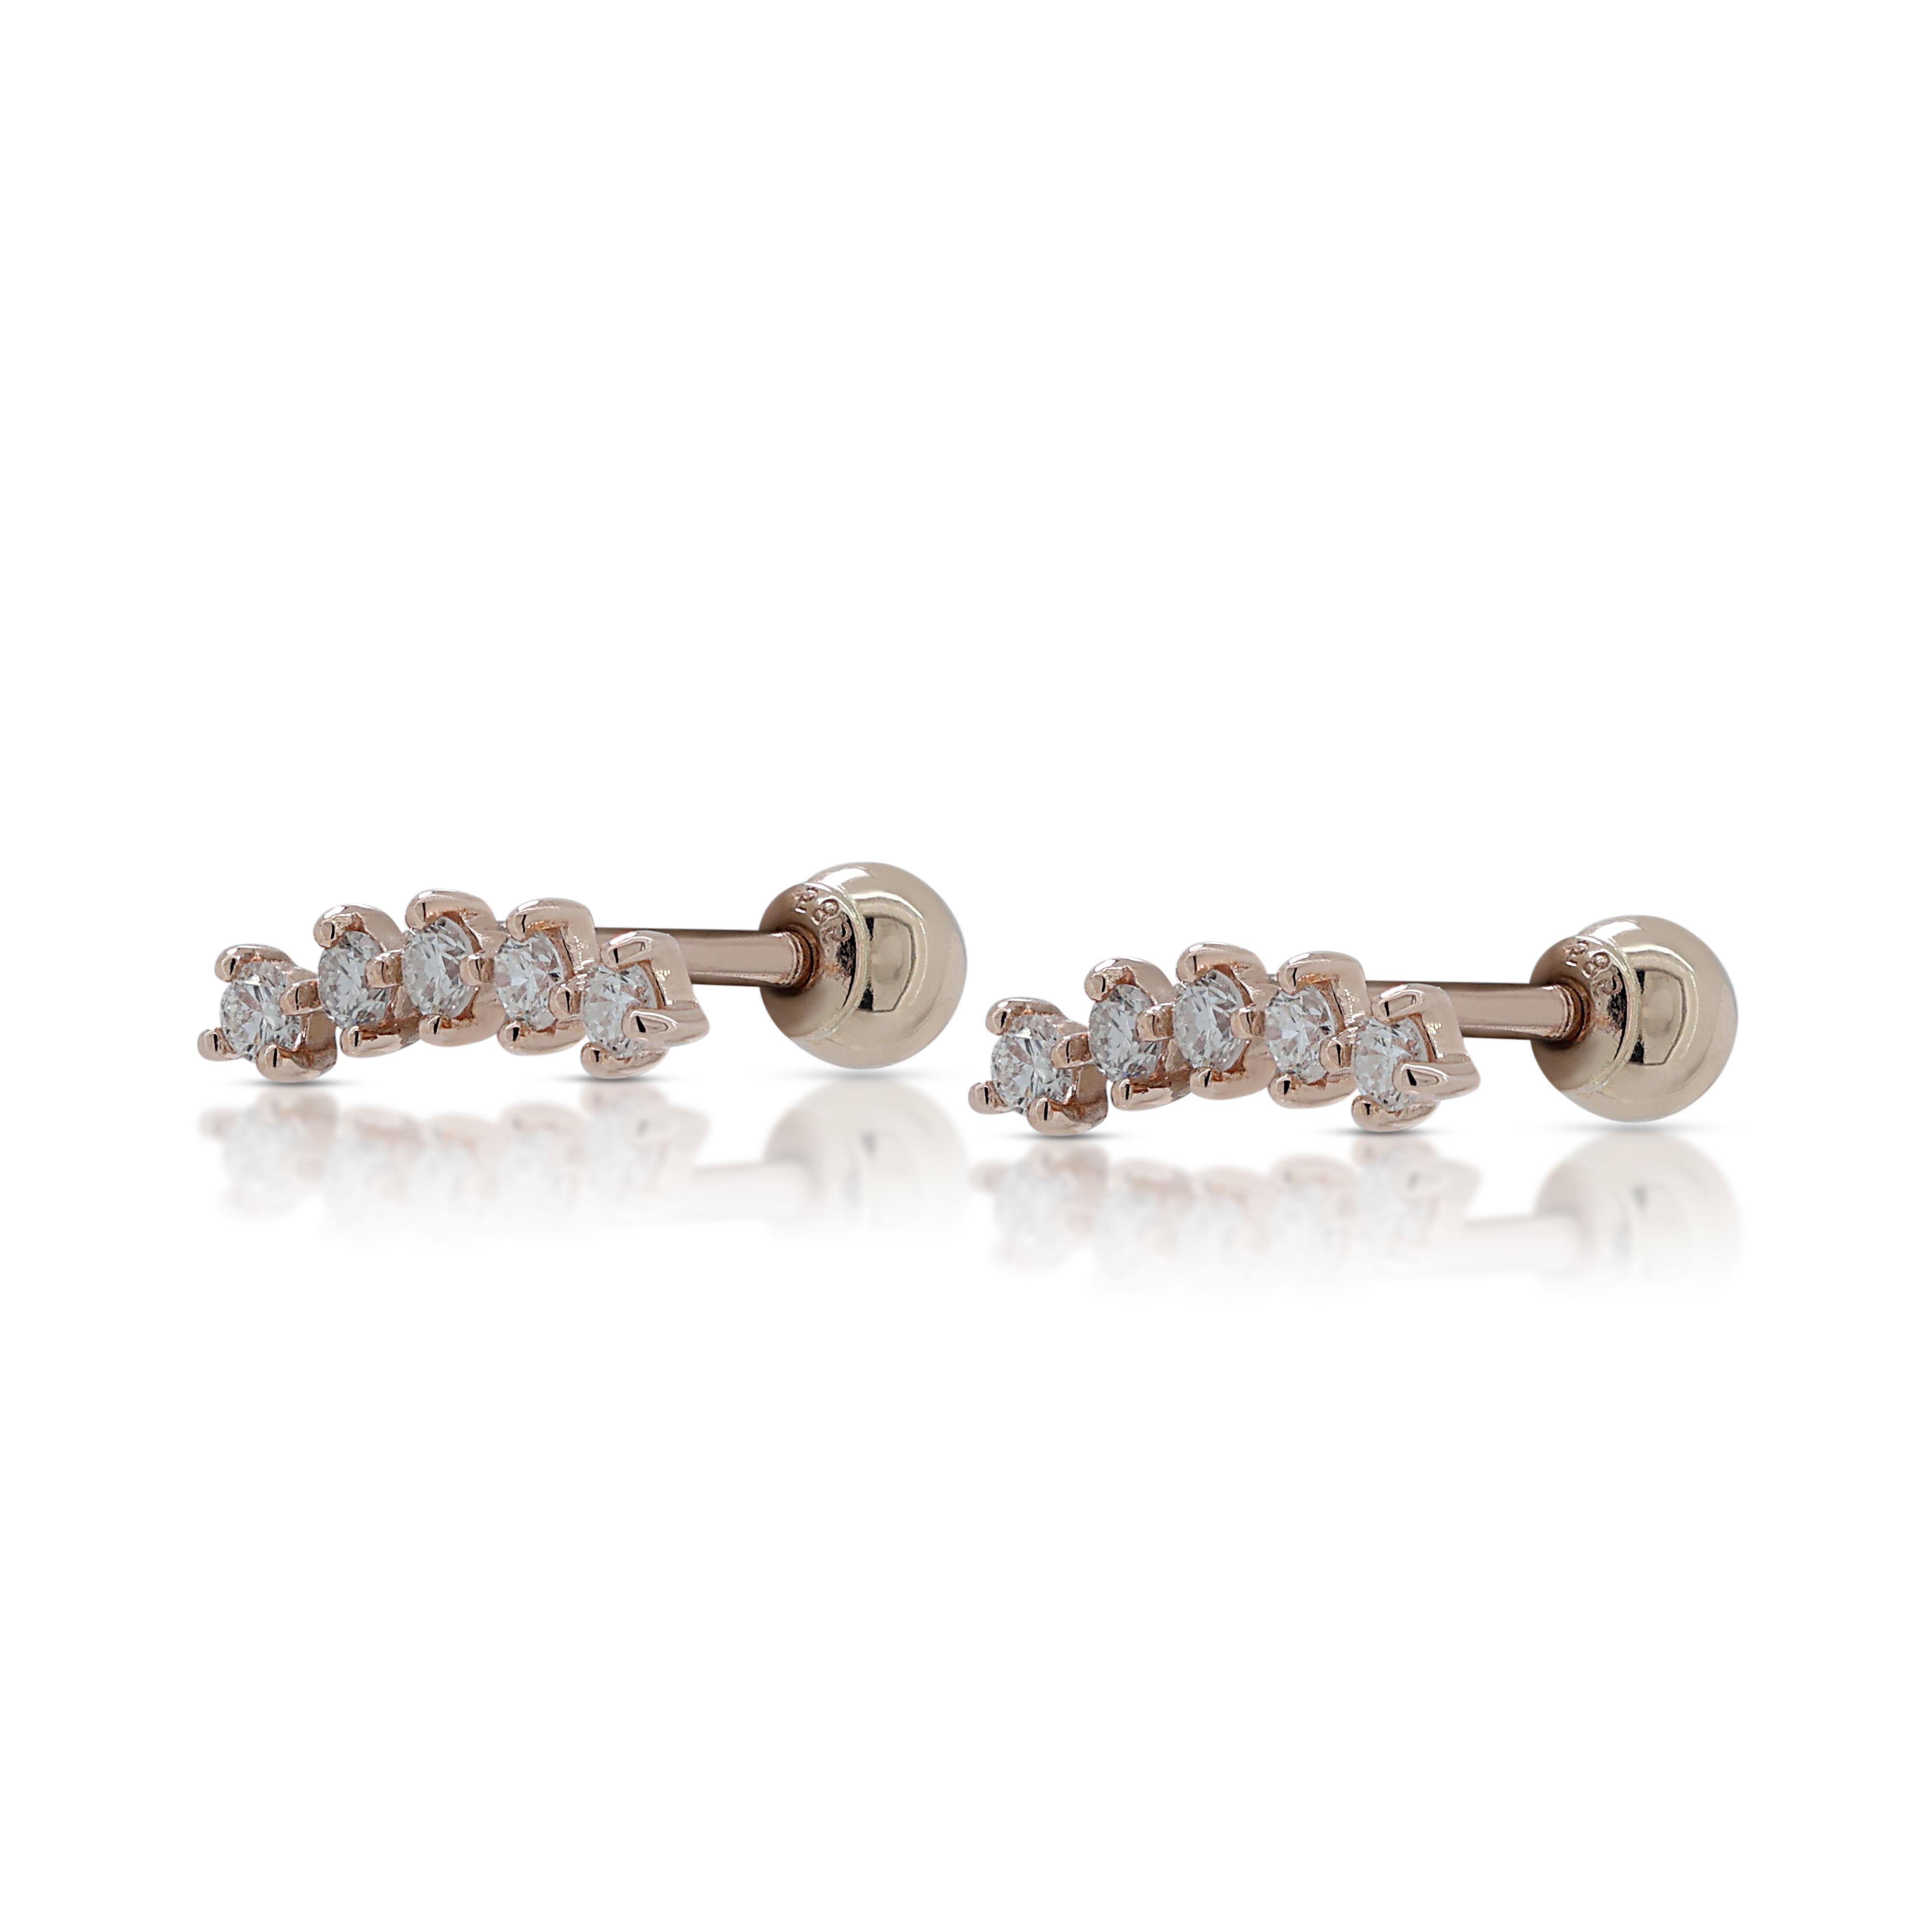 Beautiful 0.10ct Diamonds Stud Earrings in 18K Rose Gold In Excellent Condition For Sale In רמת גן, IL